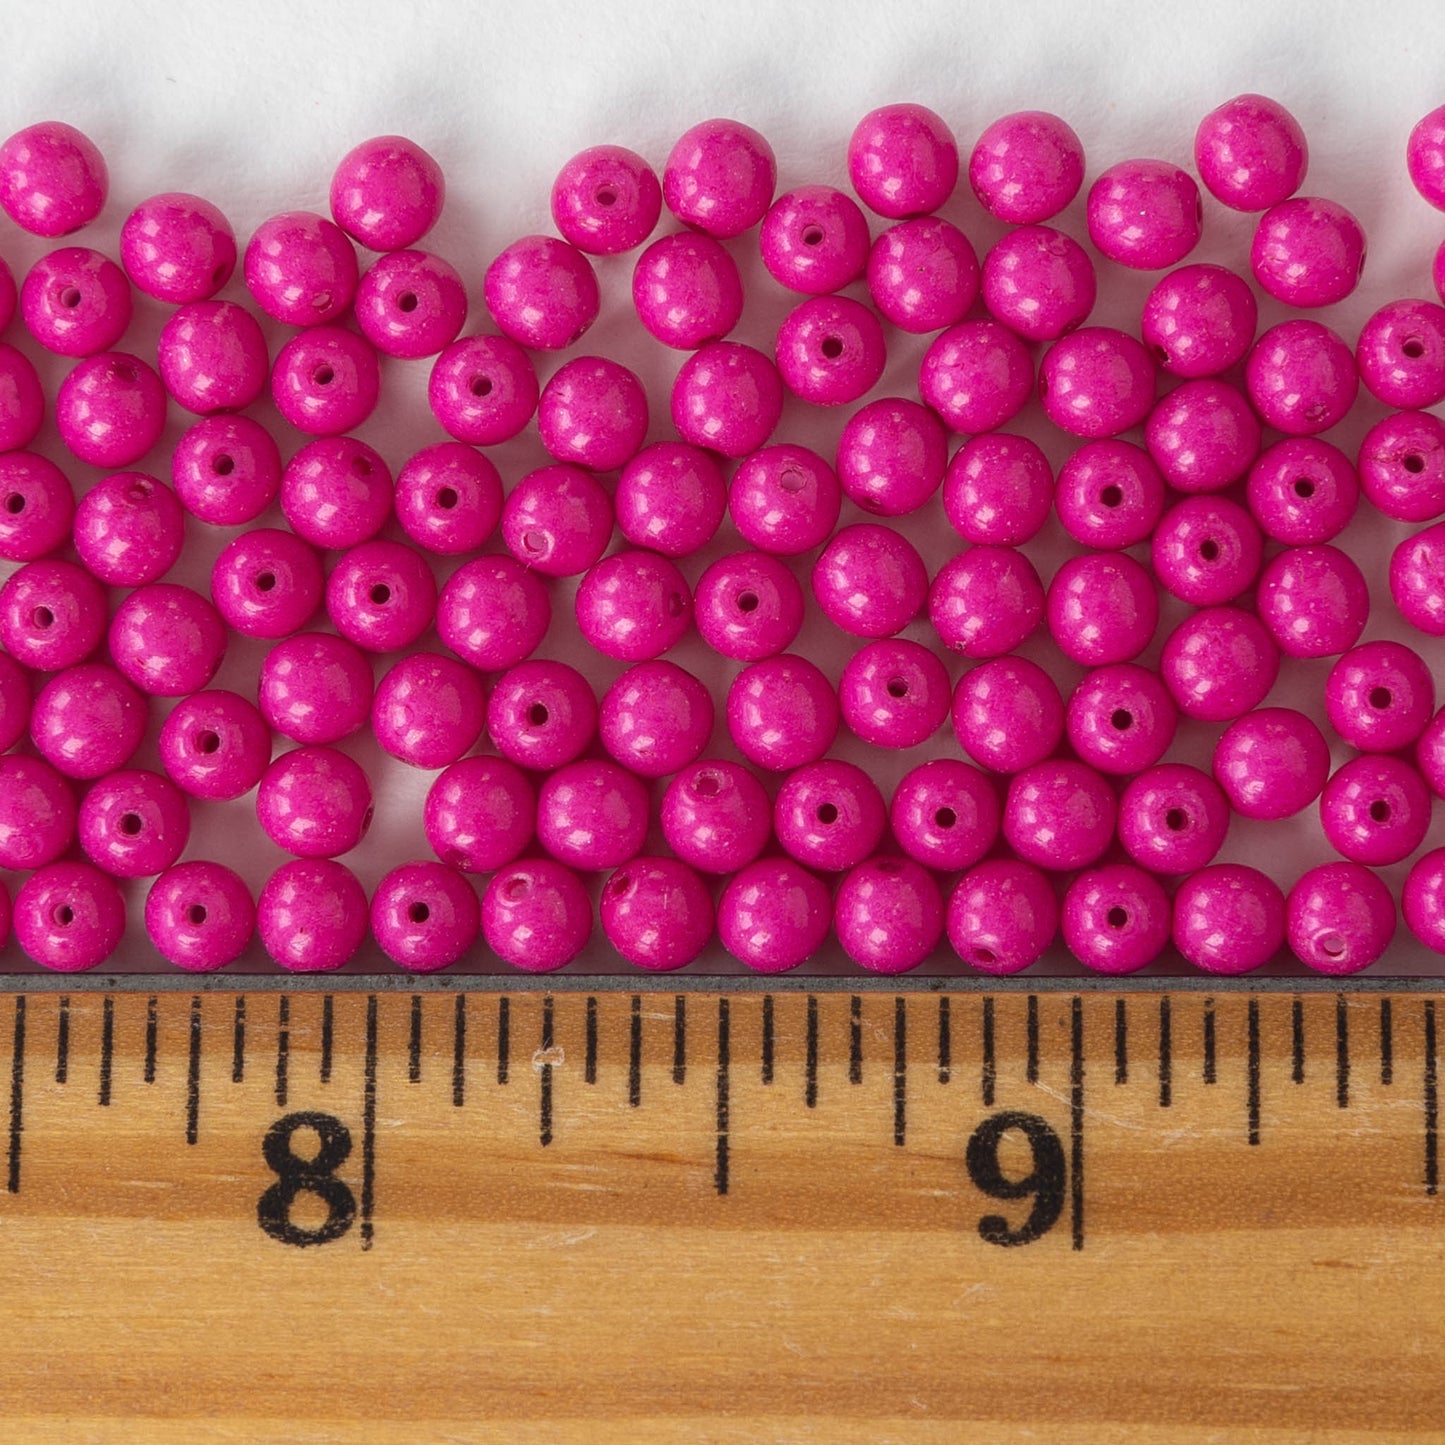 4mm Round Glass Beads - Opaque Hot Pink - 100 Beads – funkyprettybeads